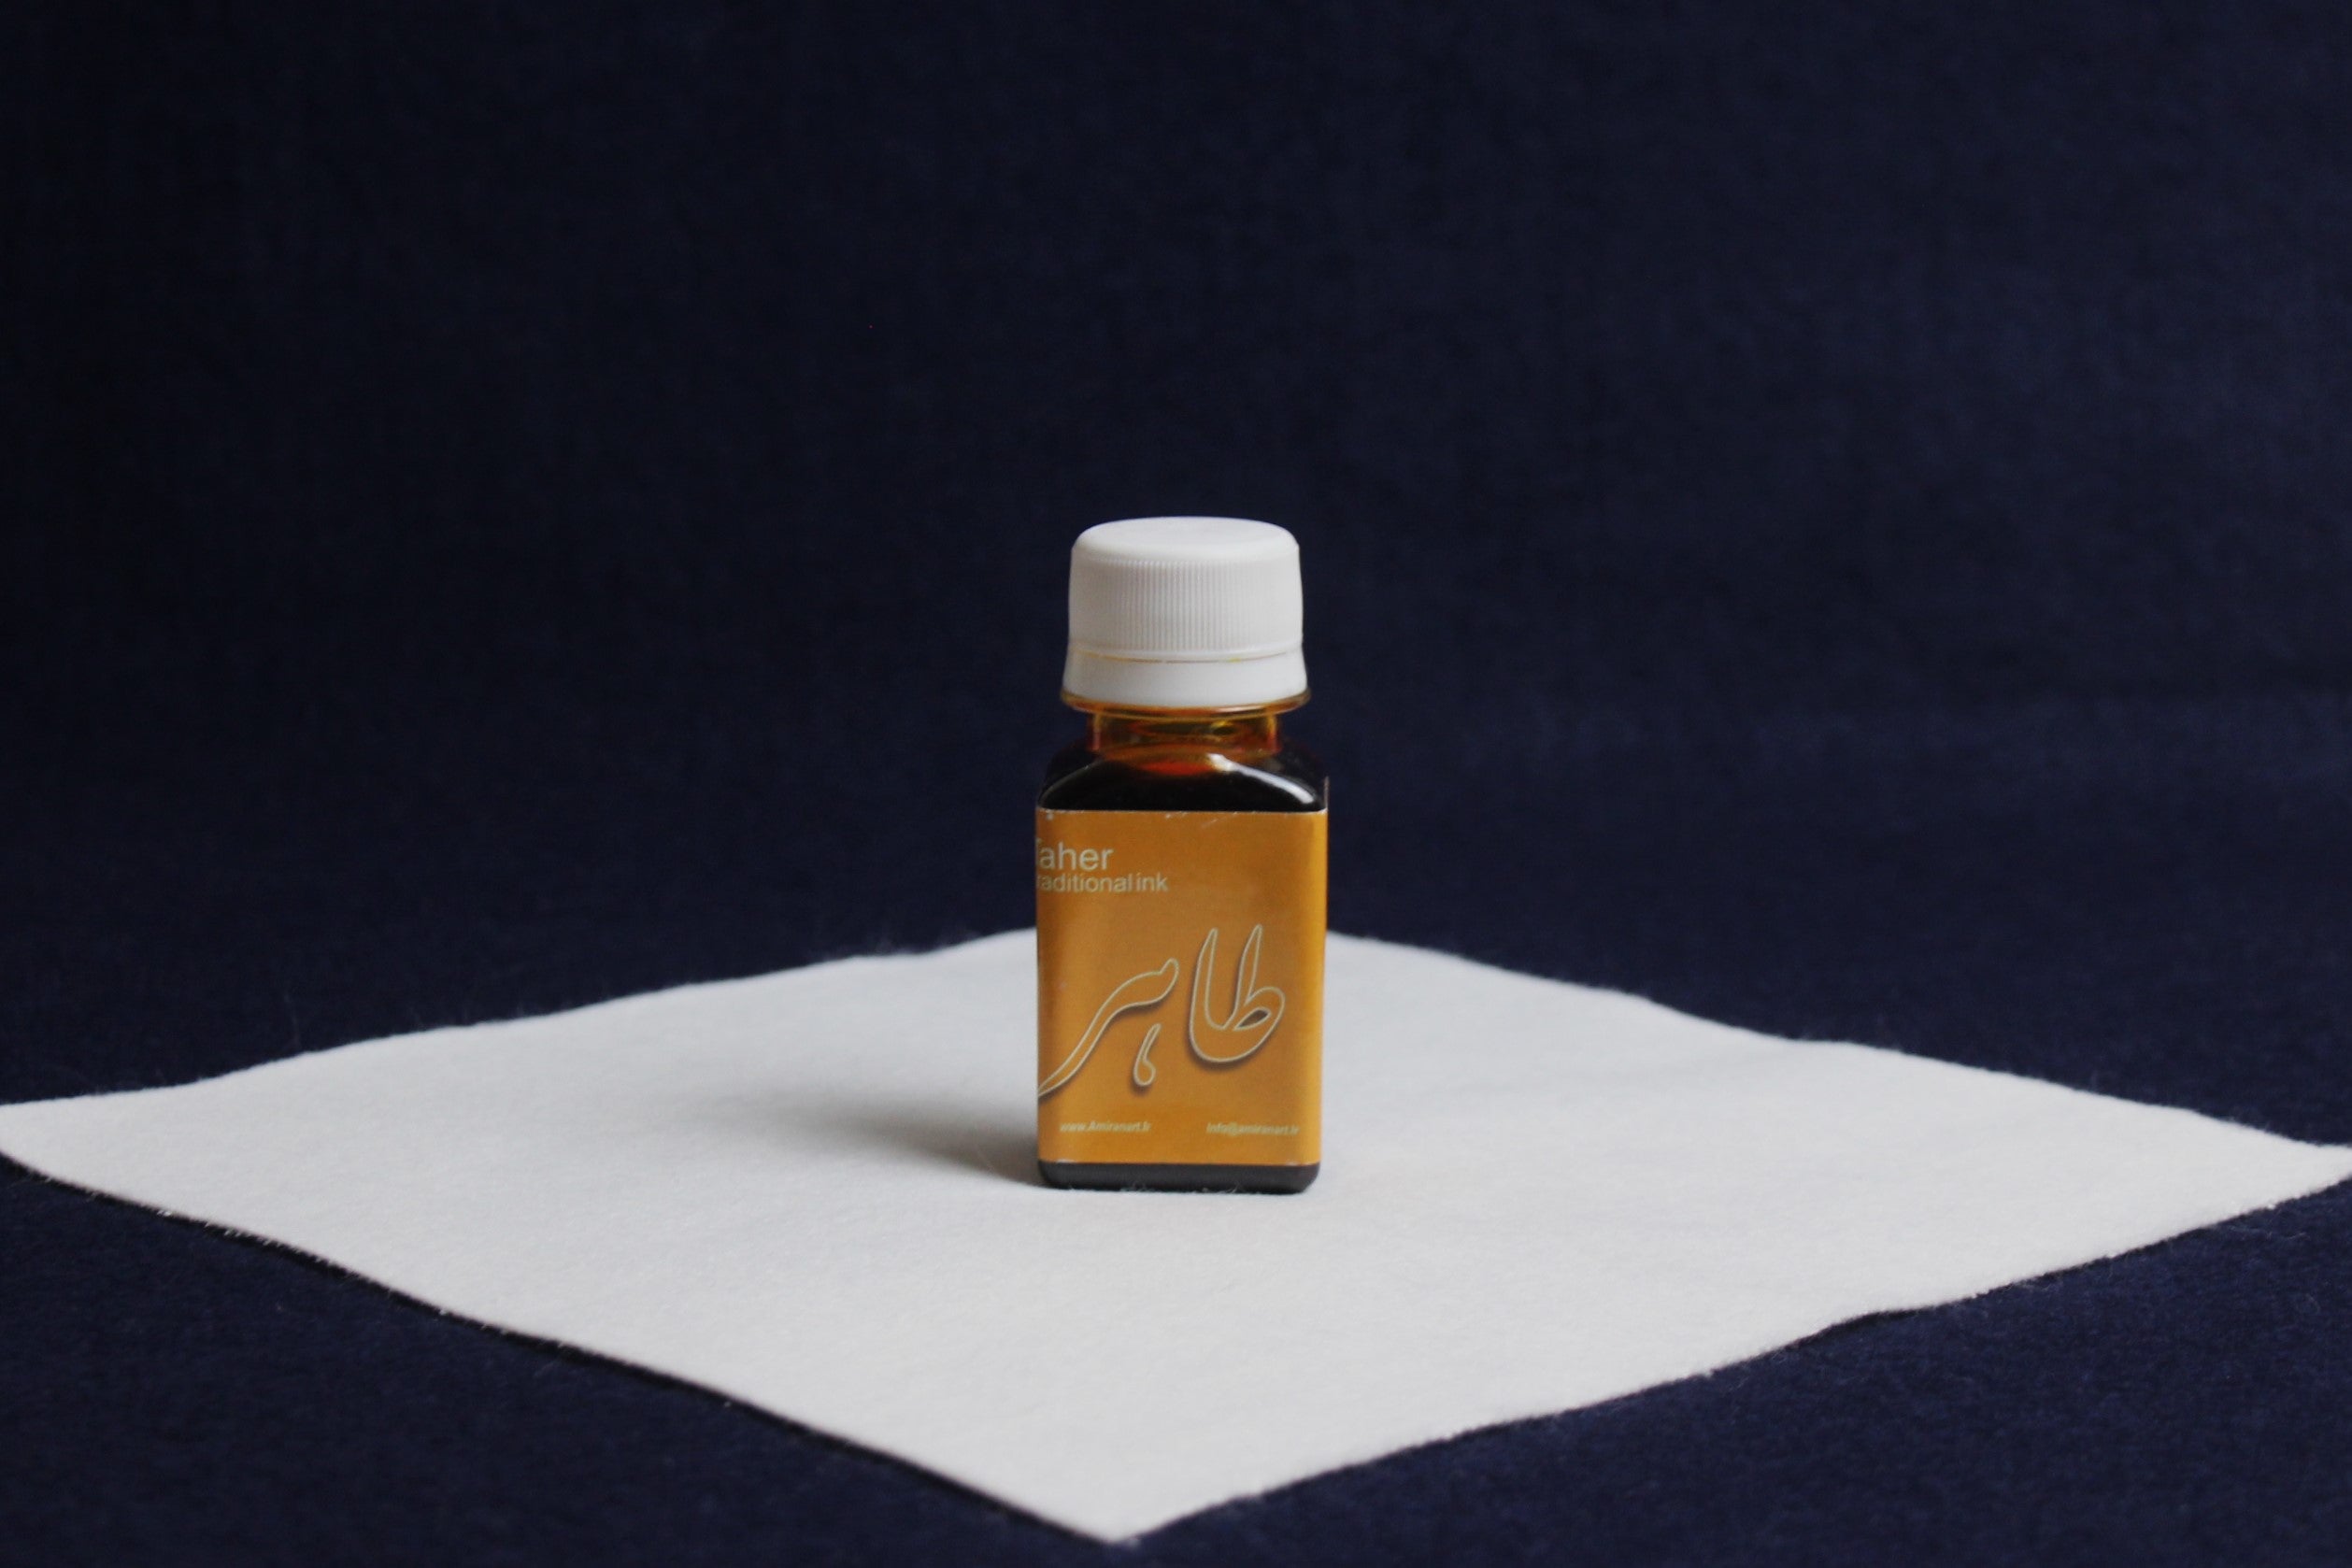 Taher traditional ink for Arabic calligraphy - saffron